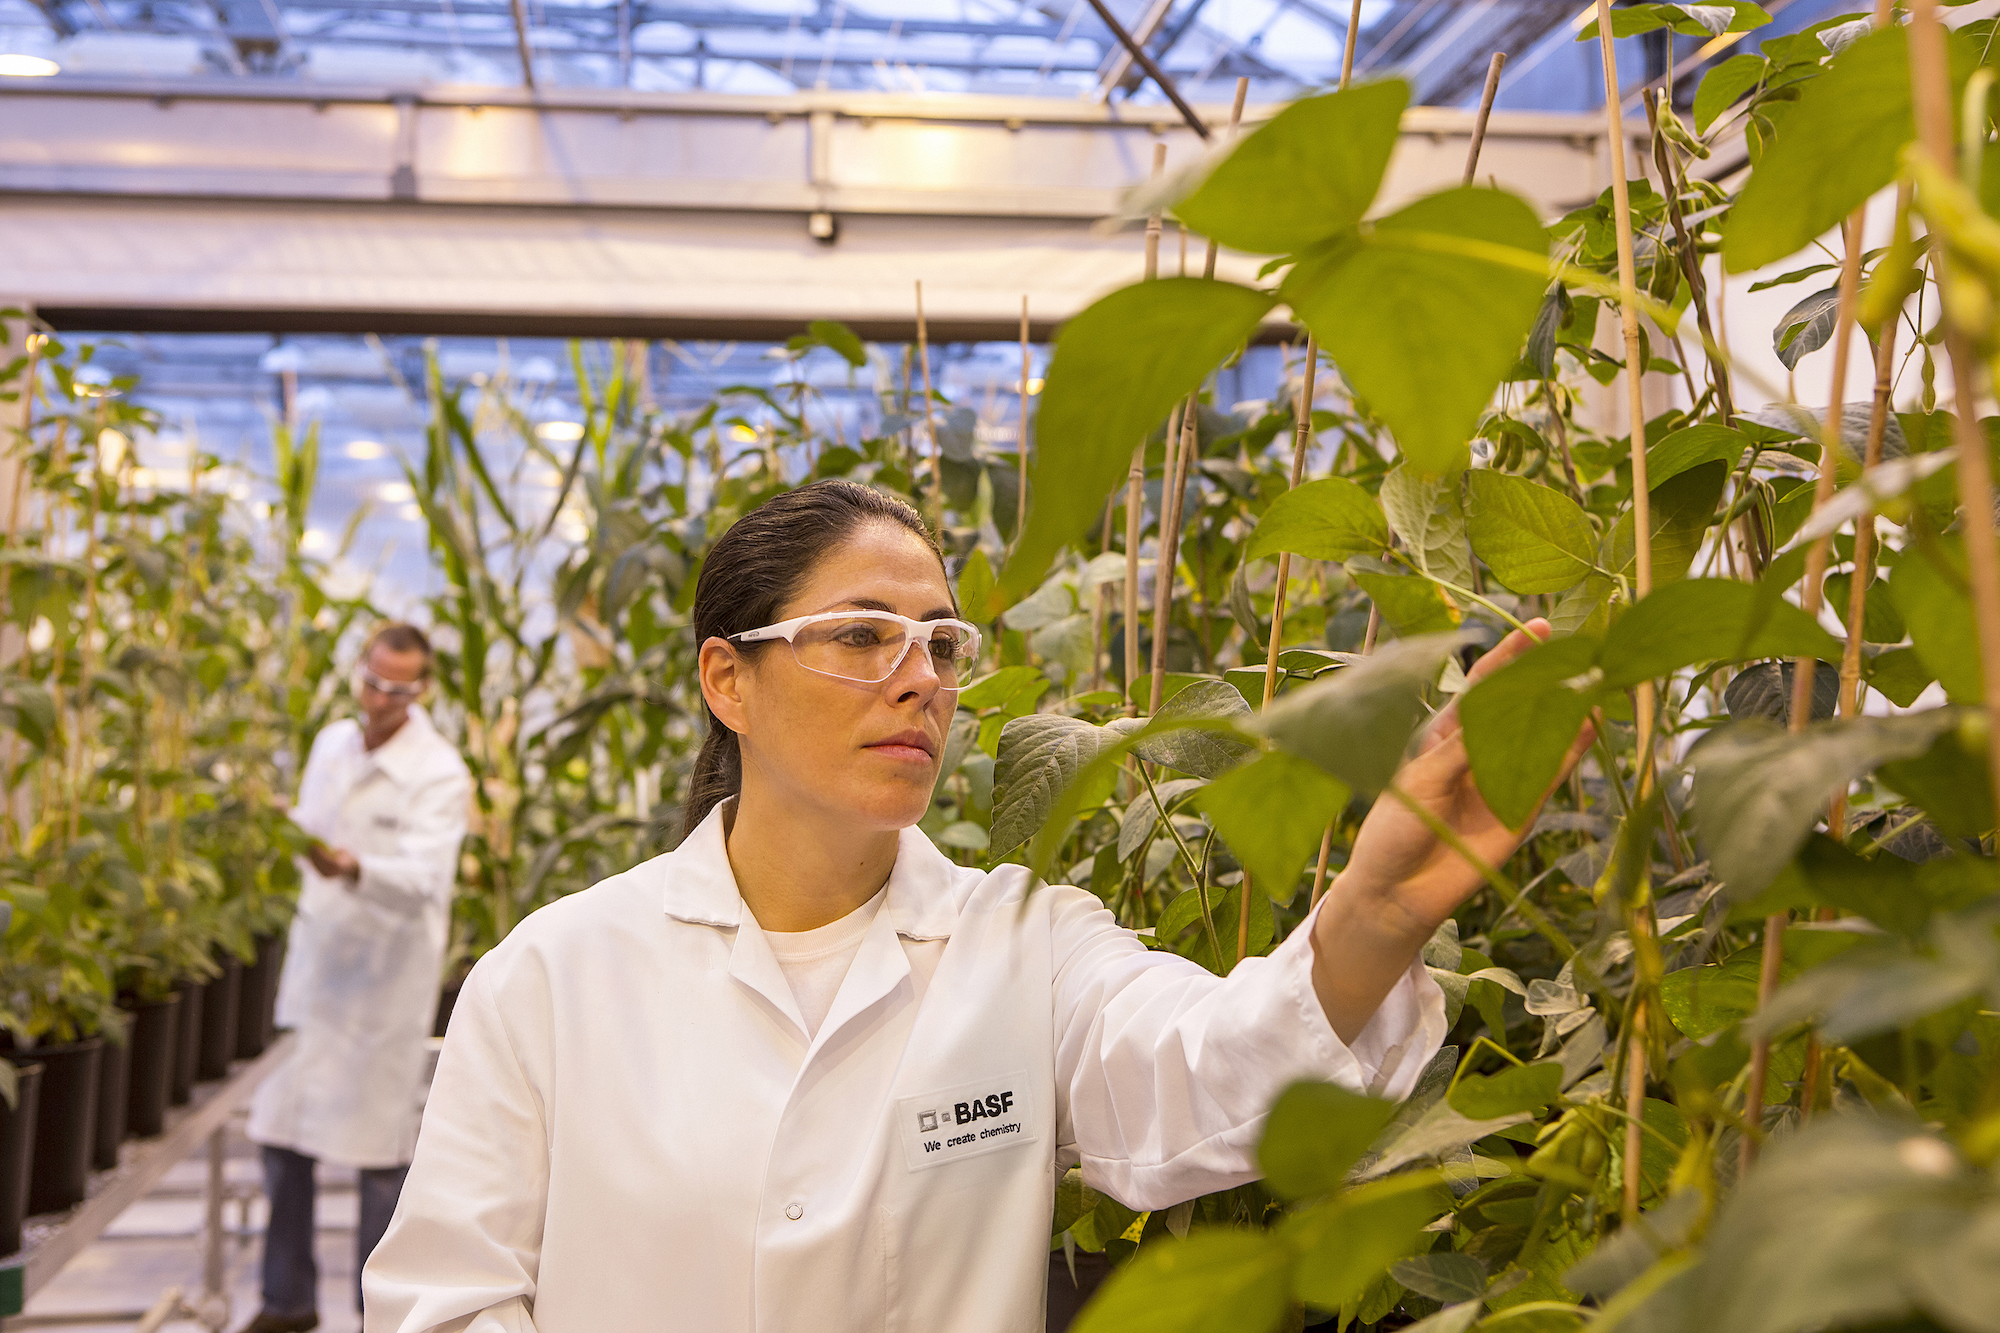 BASF advances integrated solutions to accelerate agriculture’s transformation